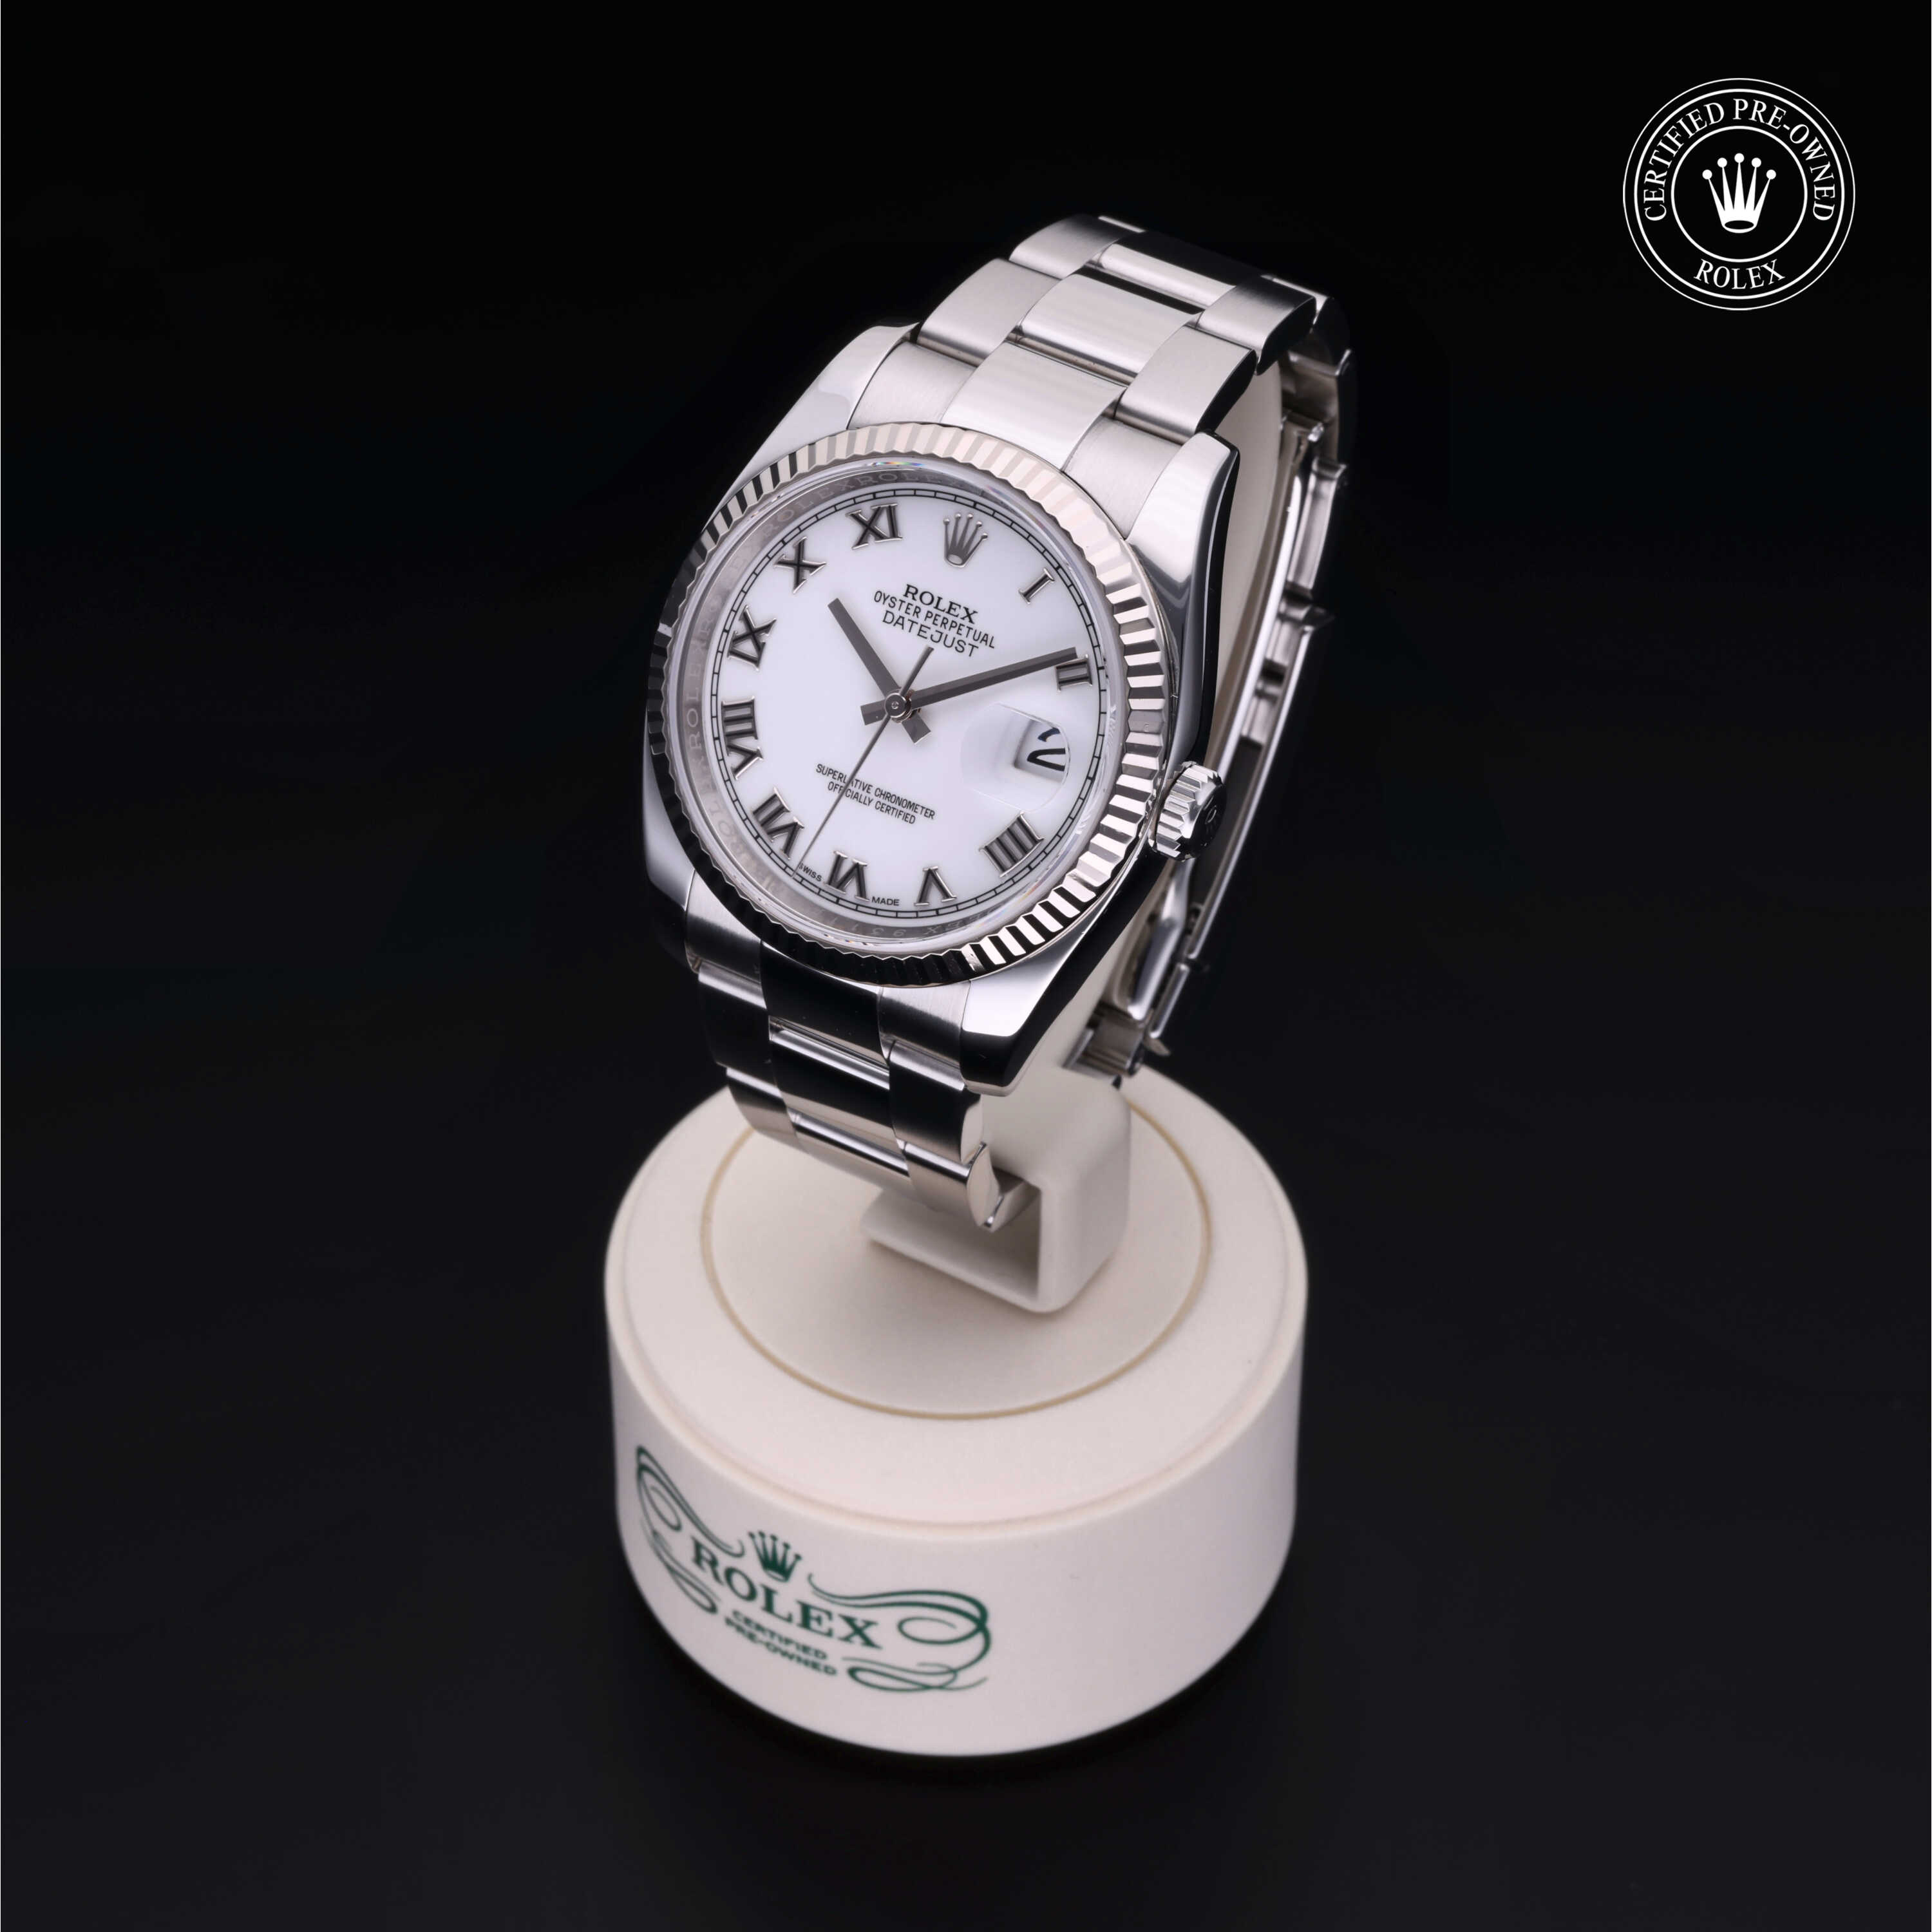 Rolex Datejust in Oystersteel and white gold M116234-0090 at Kirk Jewelers